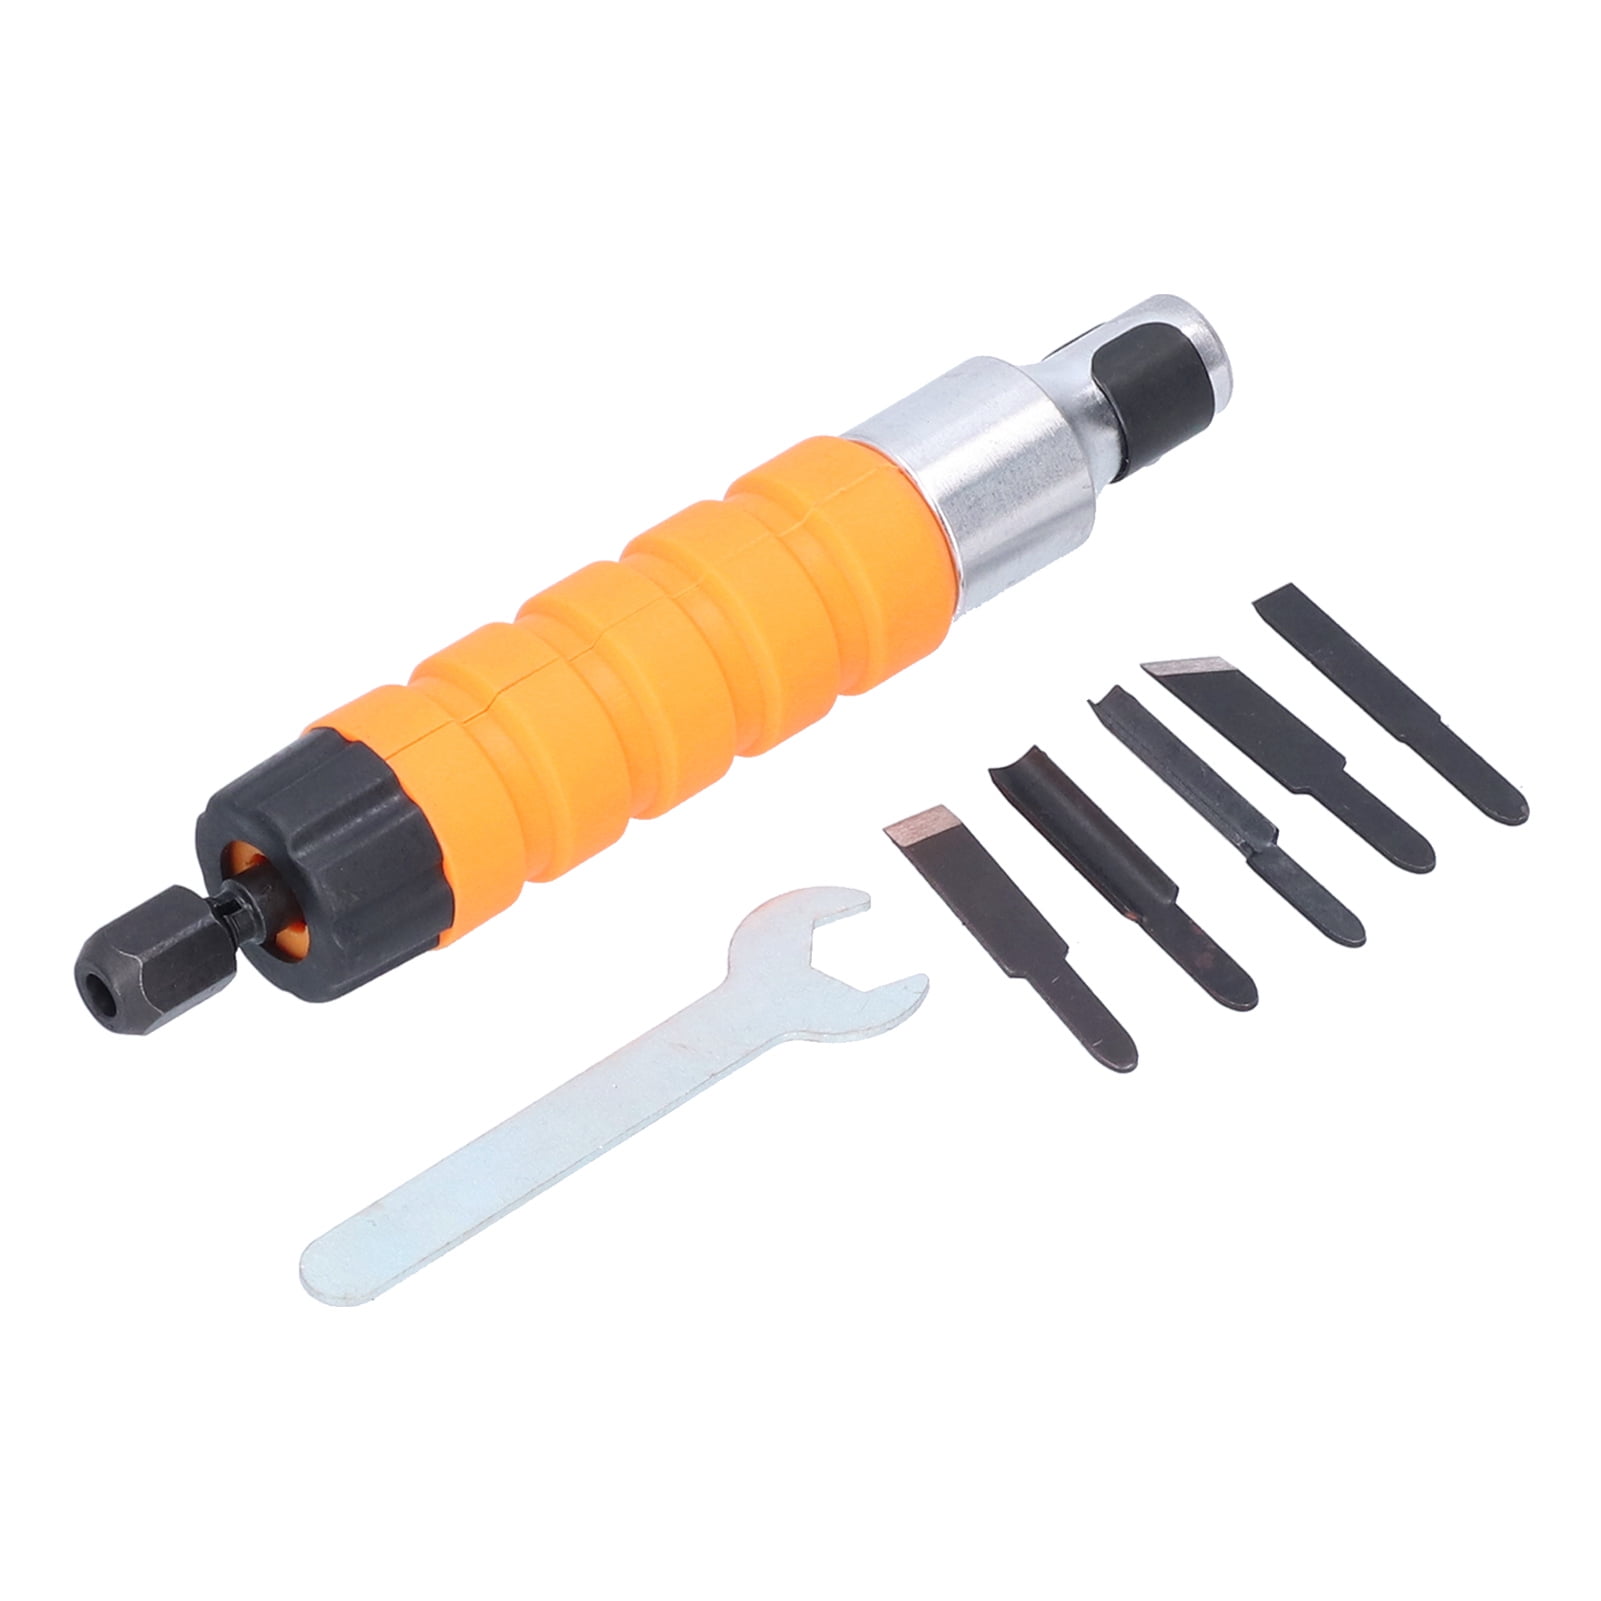 Toolsyn Electric Wood Chisel Set. Powerful & Portable. 